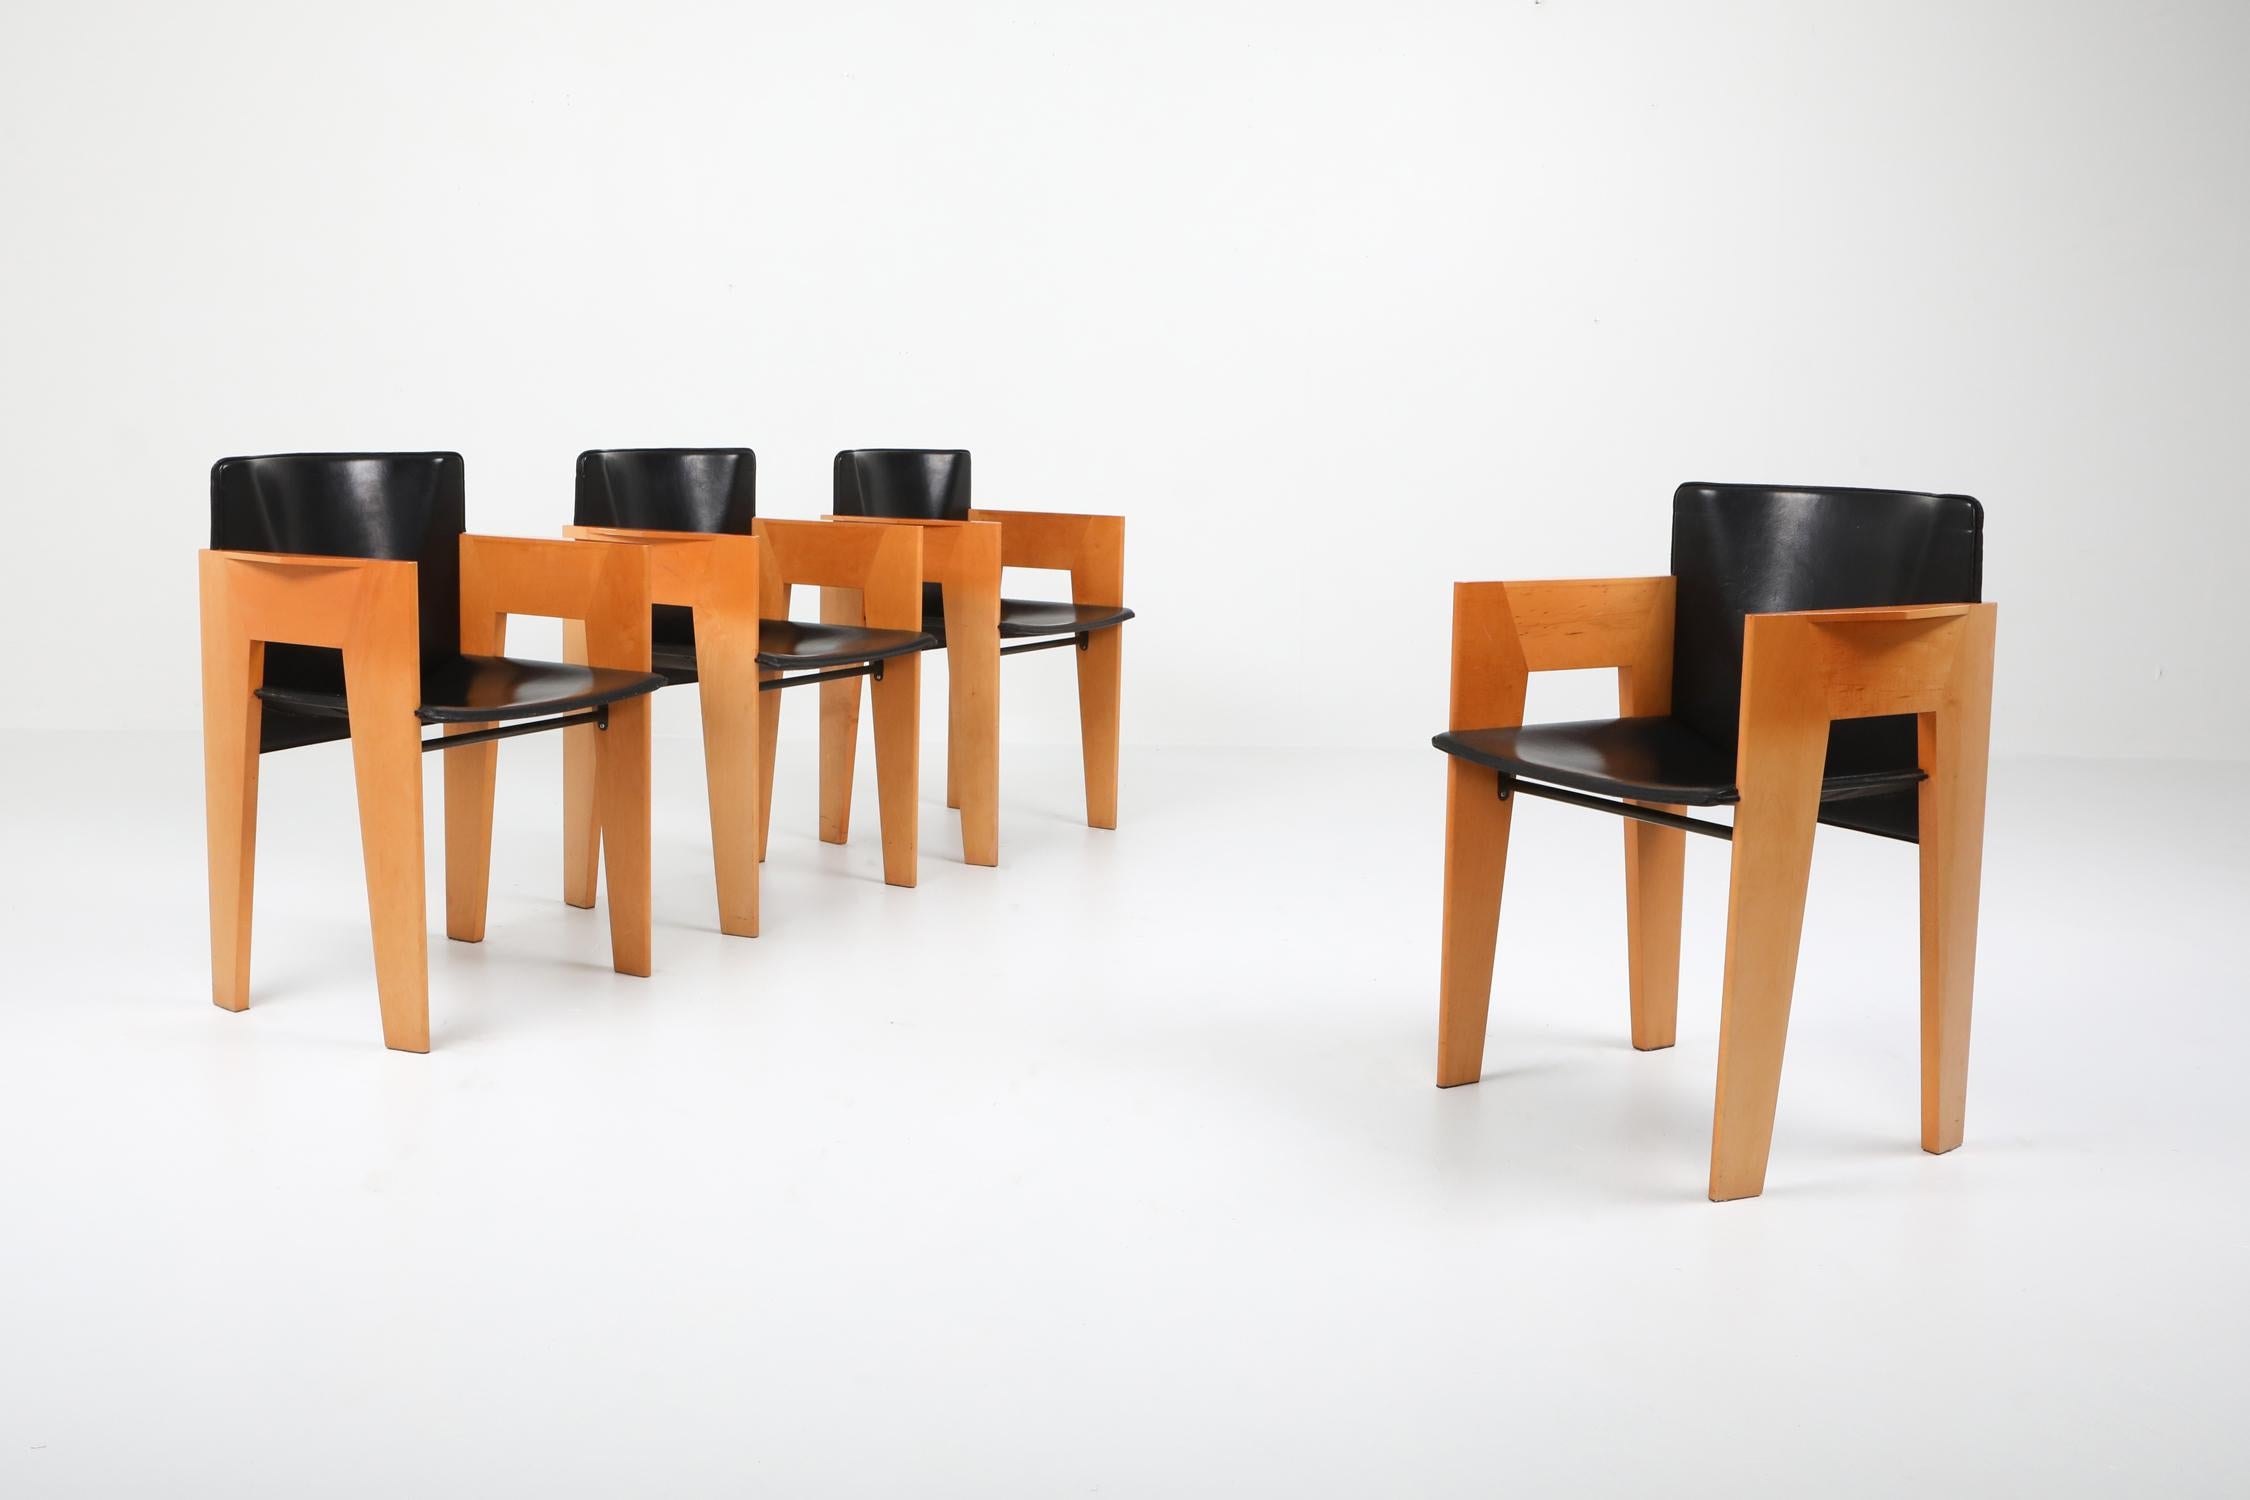 Postmodern chairs by Arco, The Netherlands, ebonized oak and saddle leather chairs, 1980s. 
Unusual armchair designed by a Dutch architect. Sculptural and elegant appearance mixed with quality materials make these a great design. We have 4 pieces